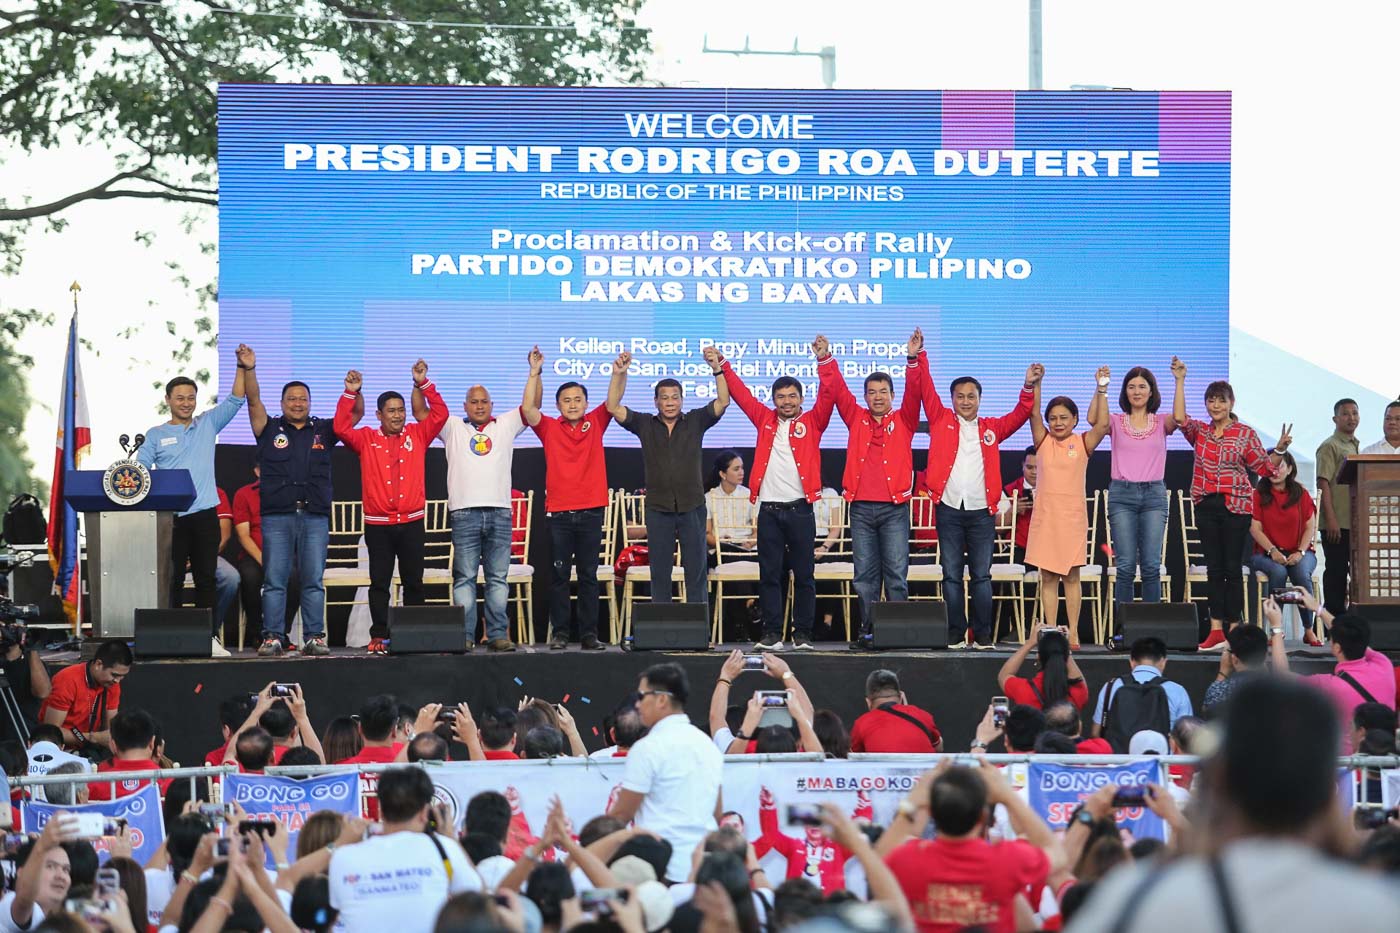 PRESIDENTIAL ENDORSEMENT. President Rodrigo Duterte endorses senatorial candidates from the PDP-Laban during its kickoff rally for the 2019 midterm elections in San Jose Del Monte, Bulacan on February 14, 2019. Photo by Mary Grace dela Cerna/Rappler 